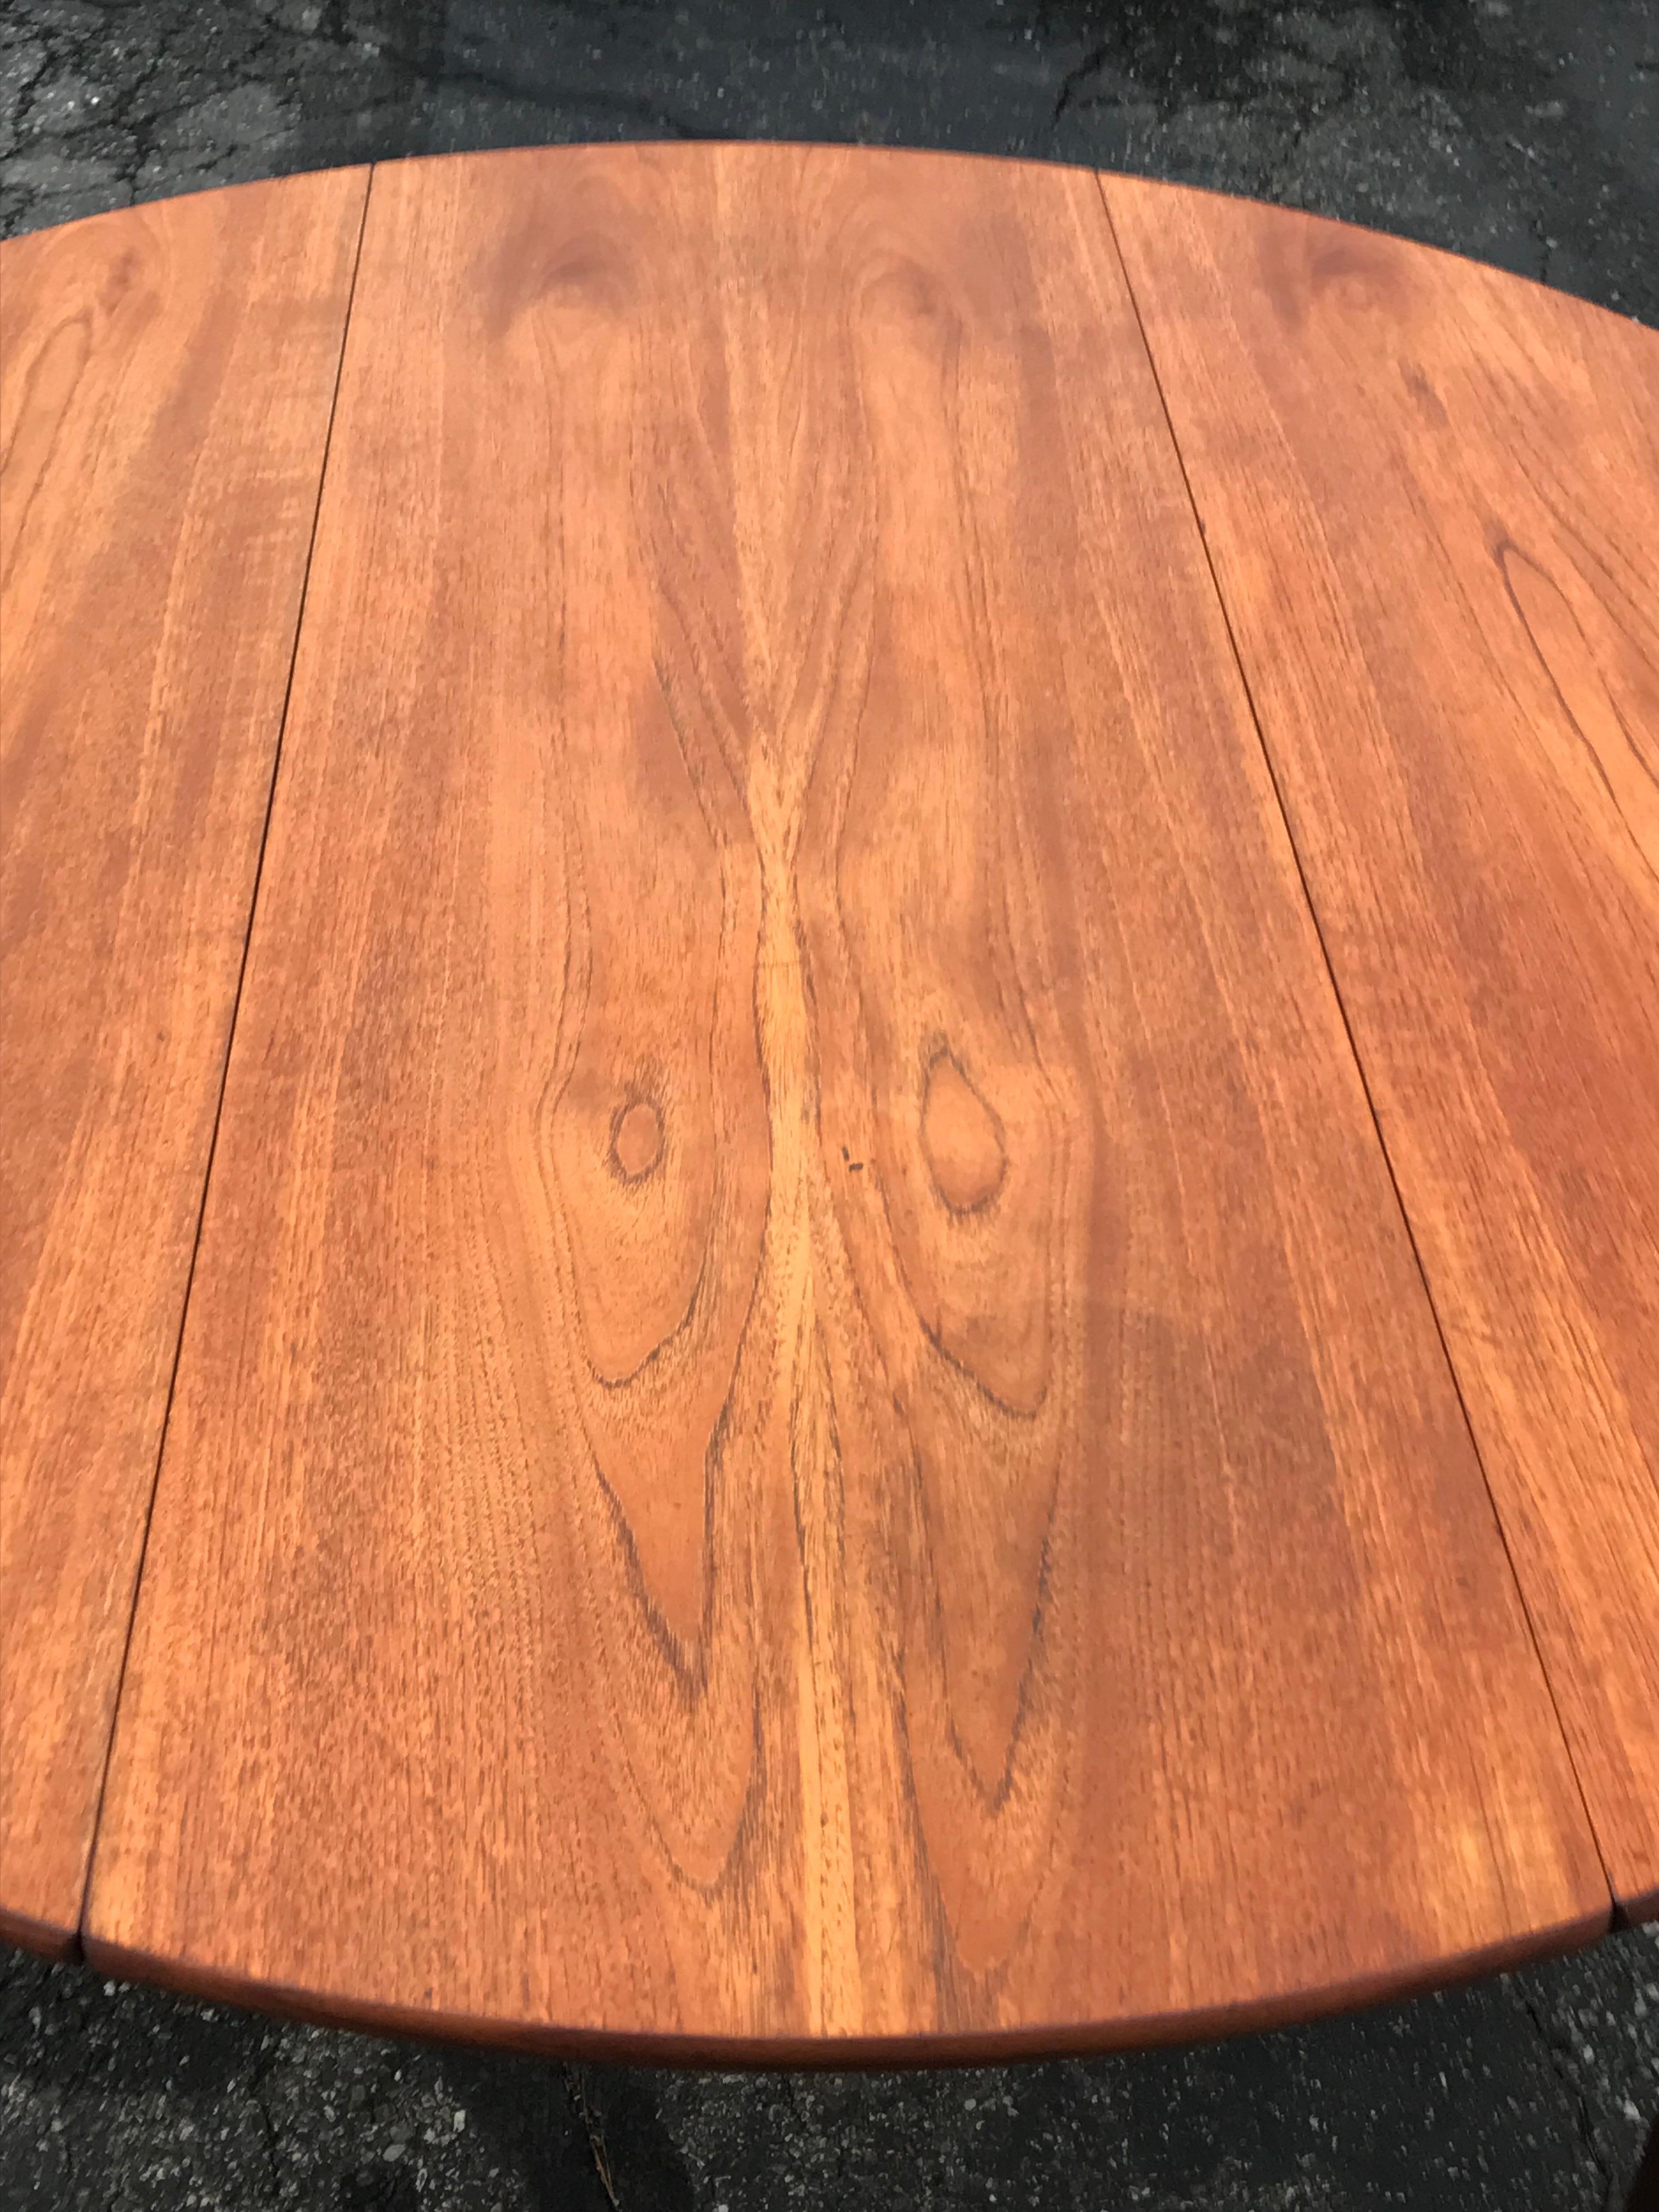 Mid Century Teak Dining Table, Round Drop Leaf, Hans Wegner Style, Denmark In Good Condition For Sale In Bedford Hills, NY